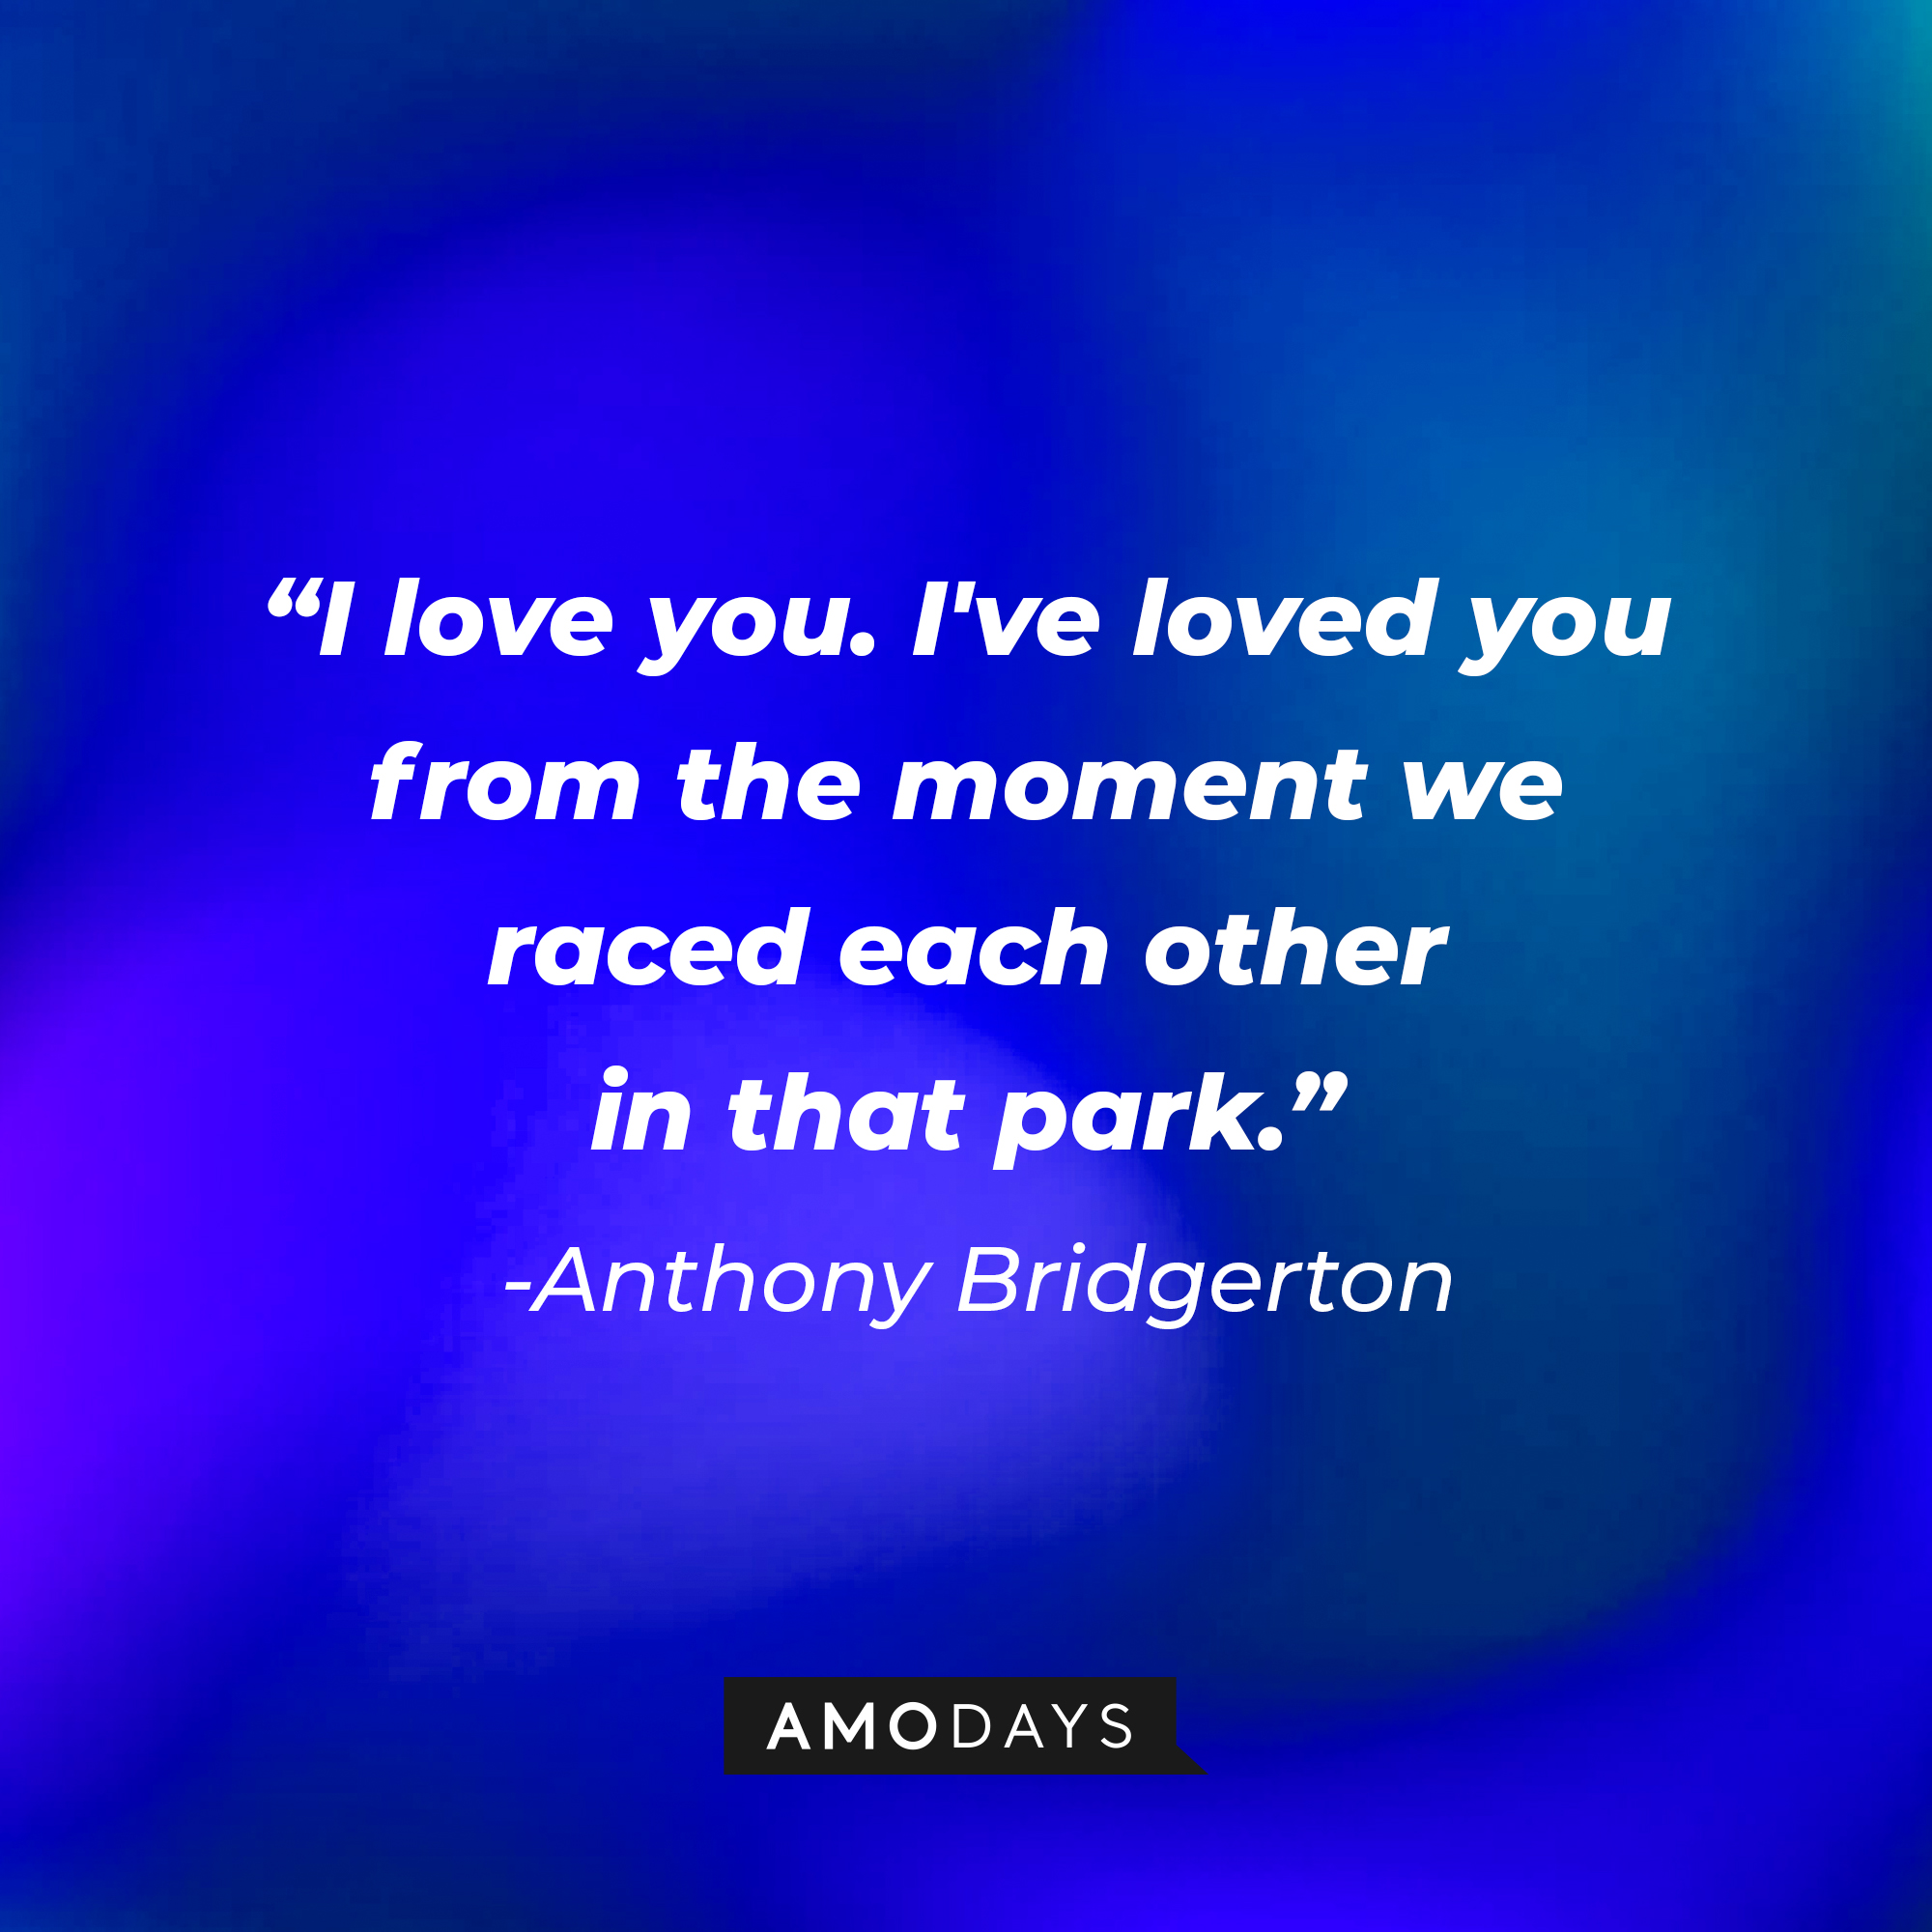 Anthony Bridgerton's quote: "I love you. I've loved you from the moment we raced each other in that park." | Source: AmoDays